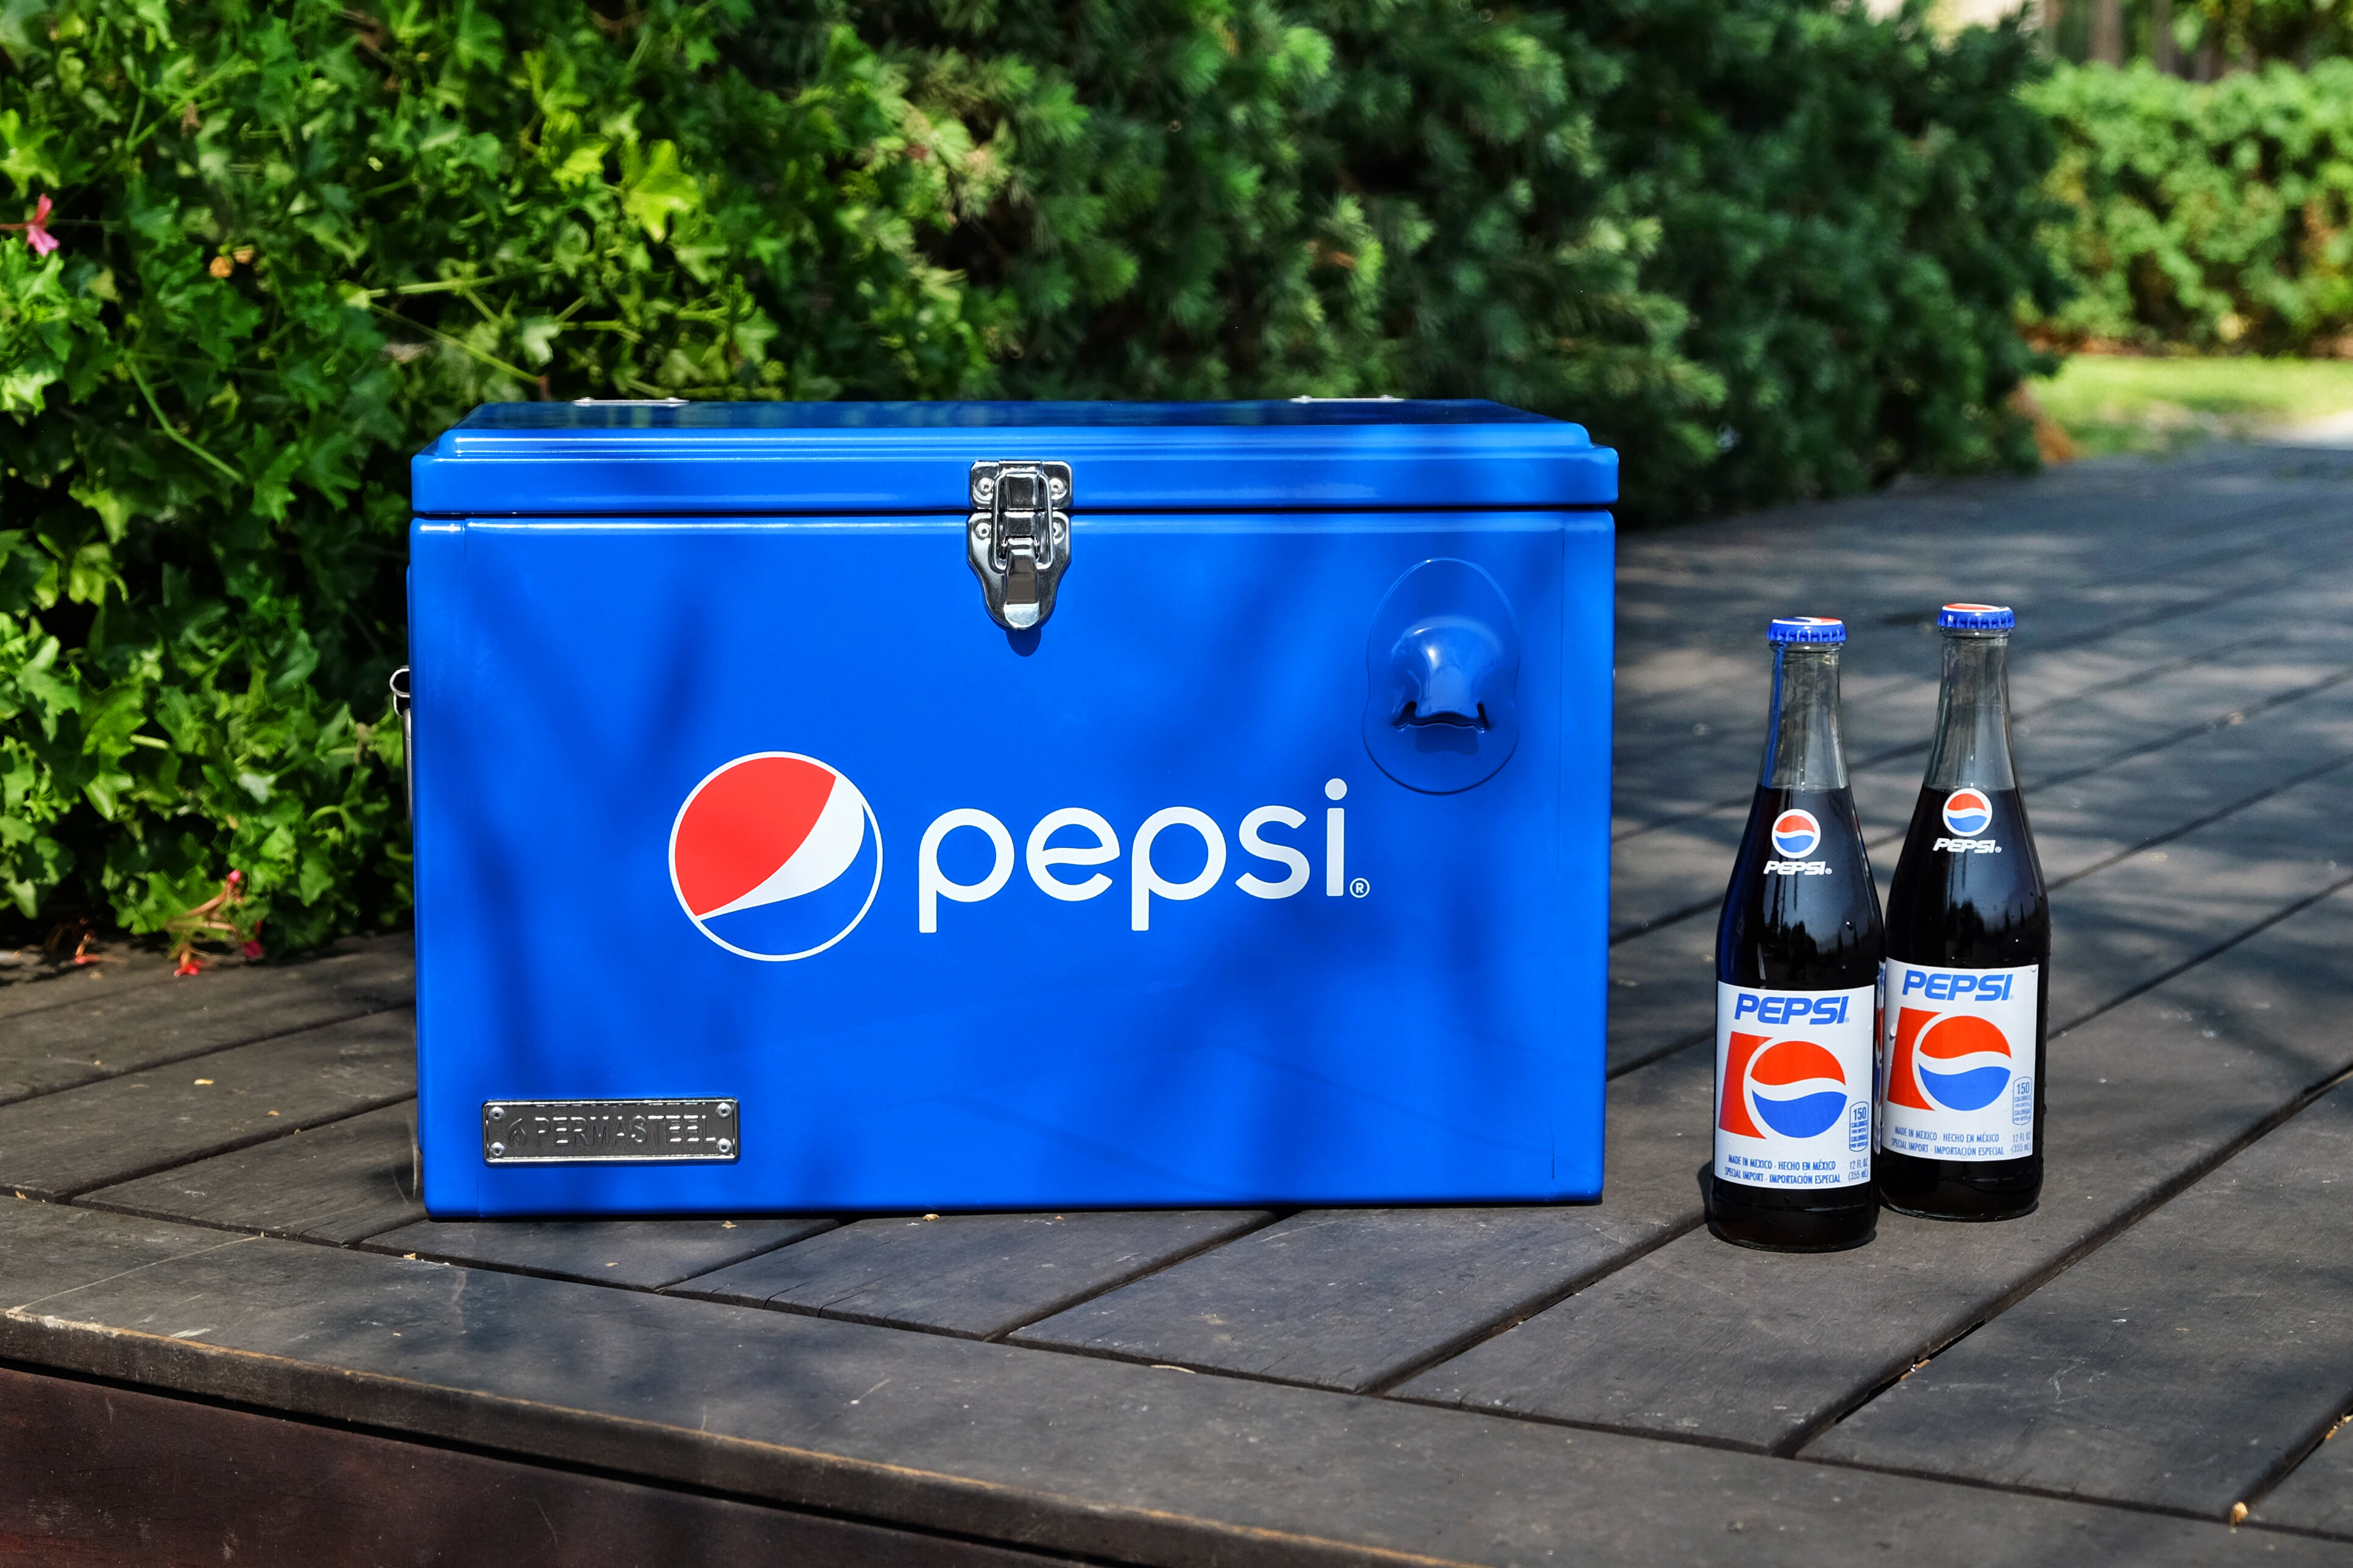 Portable Beverage Can Chiller @